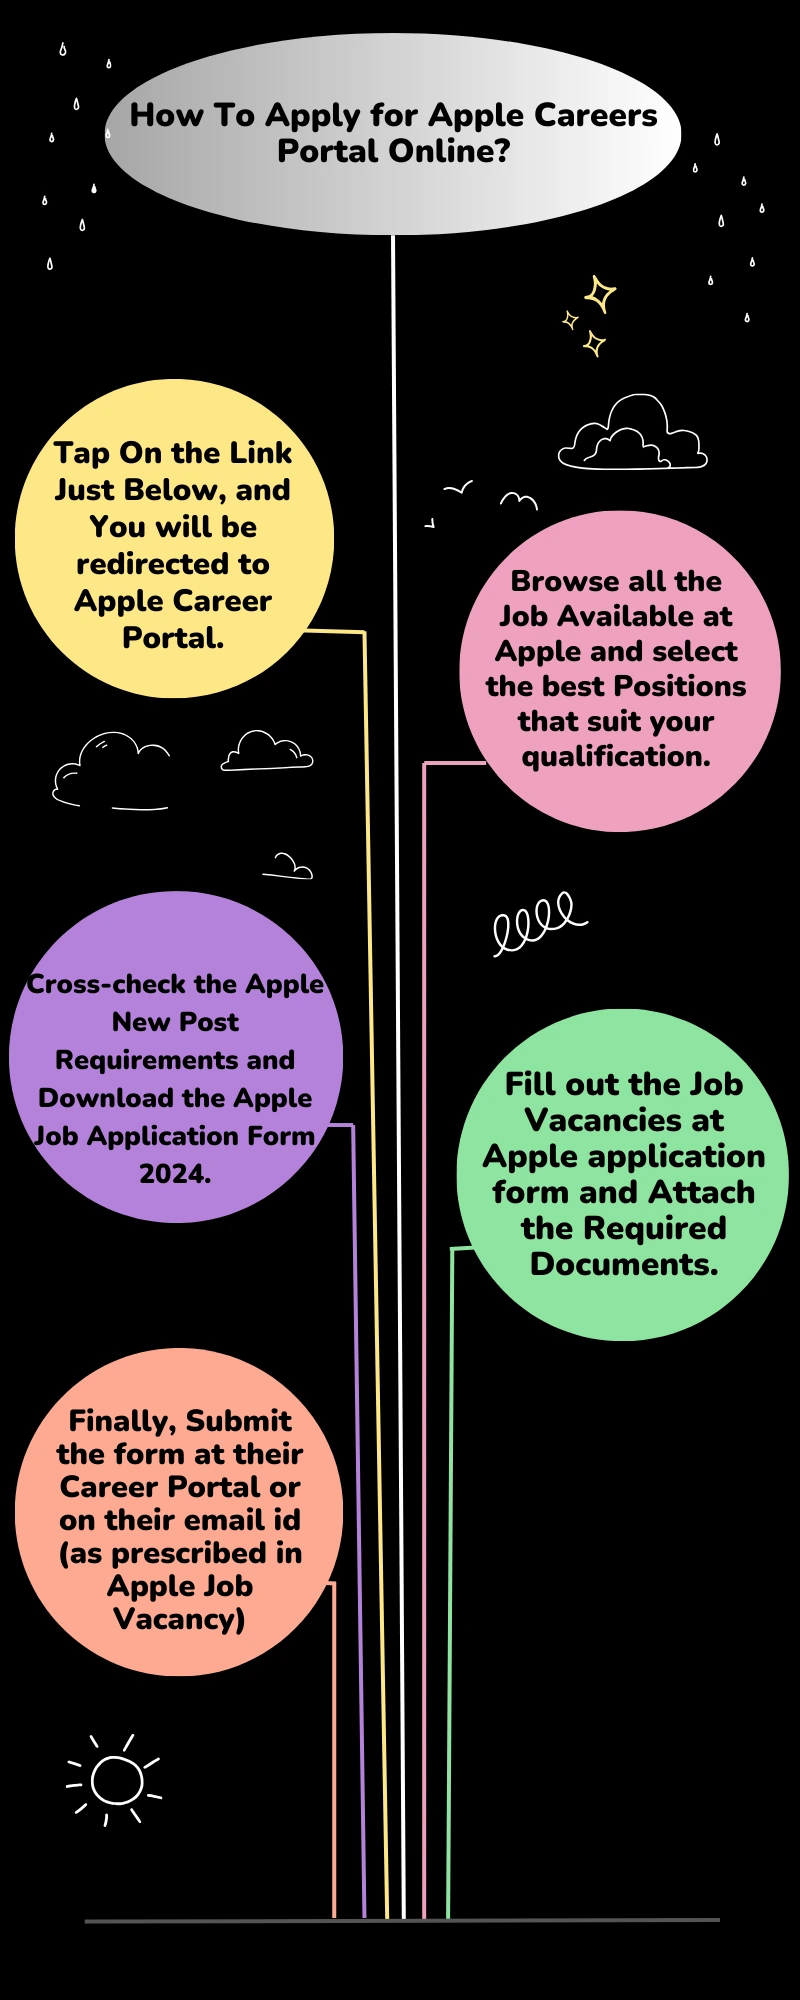 How To Apply for Apple Careers Portal Online?